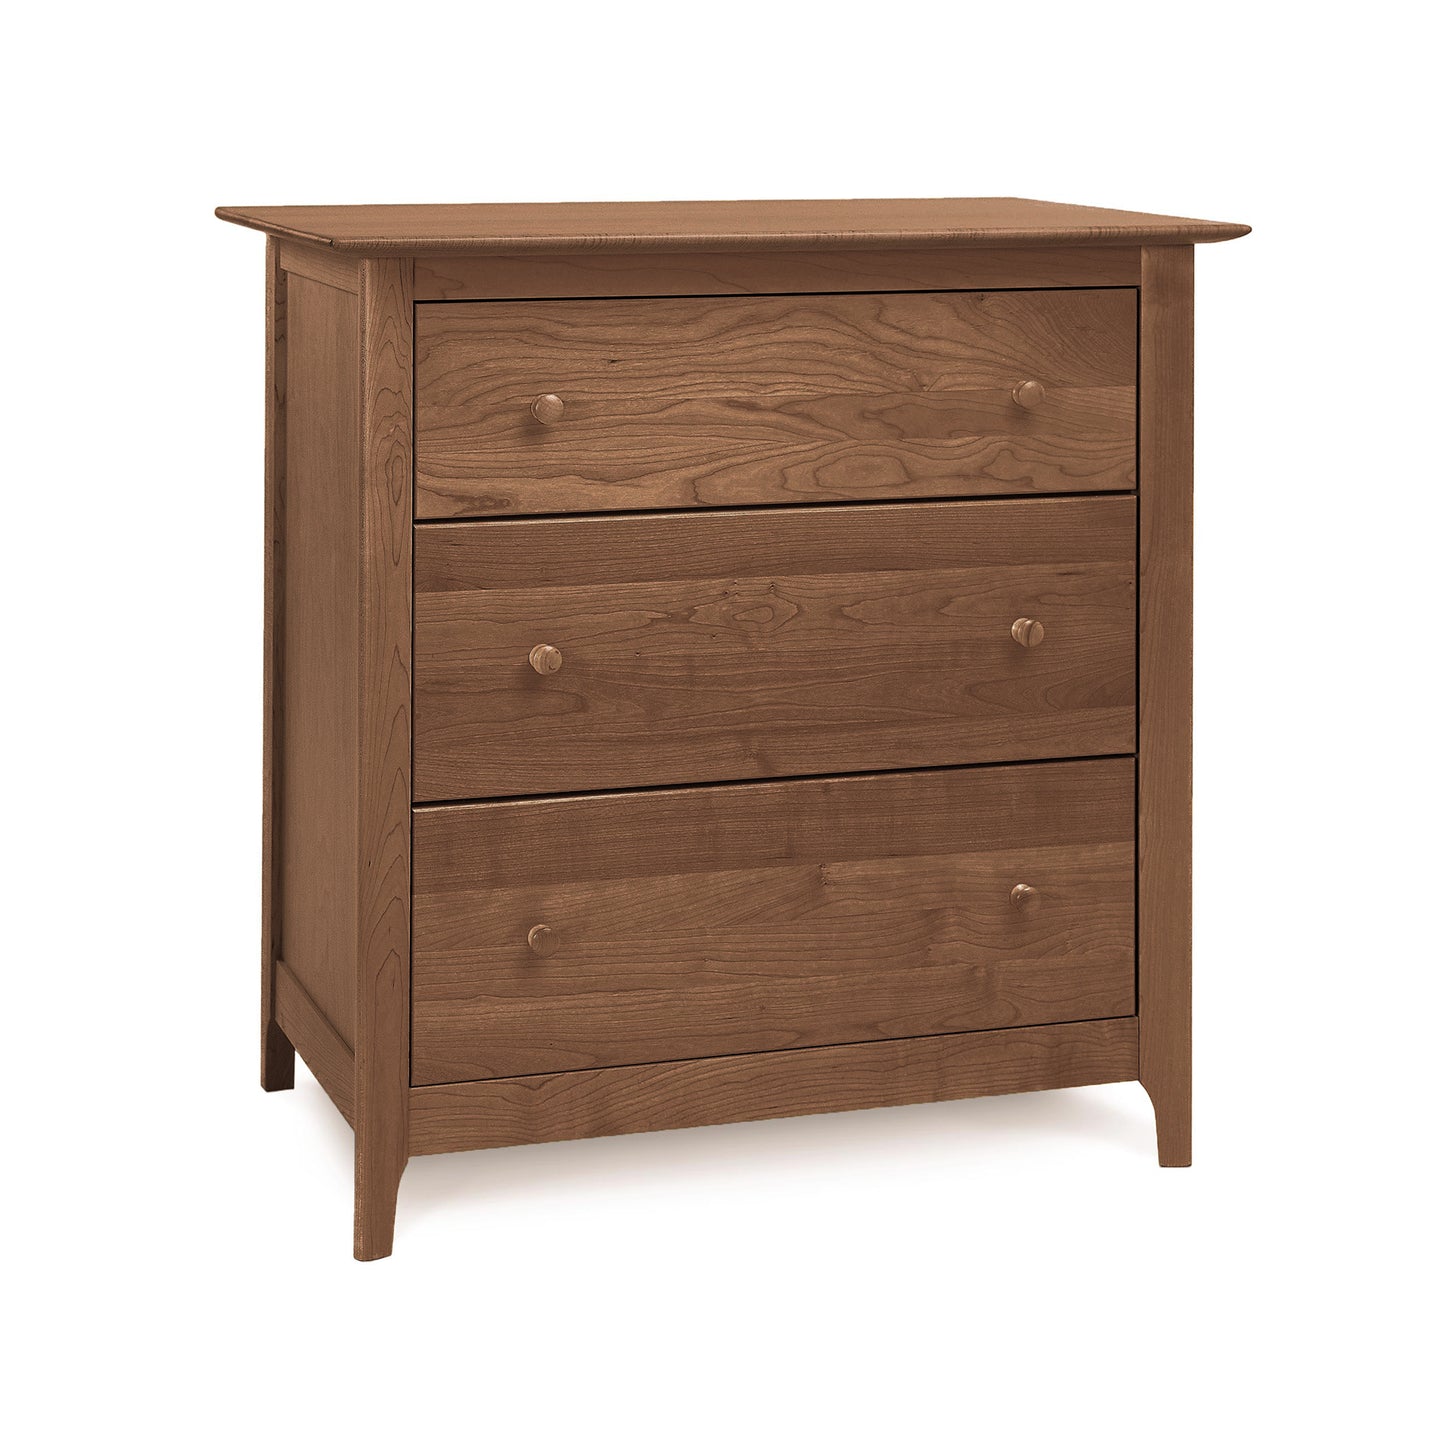 A handmade Copeland Furniture Sarah 3-Drawer Chest in natural cherry wood on a white background.